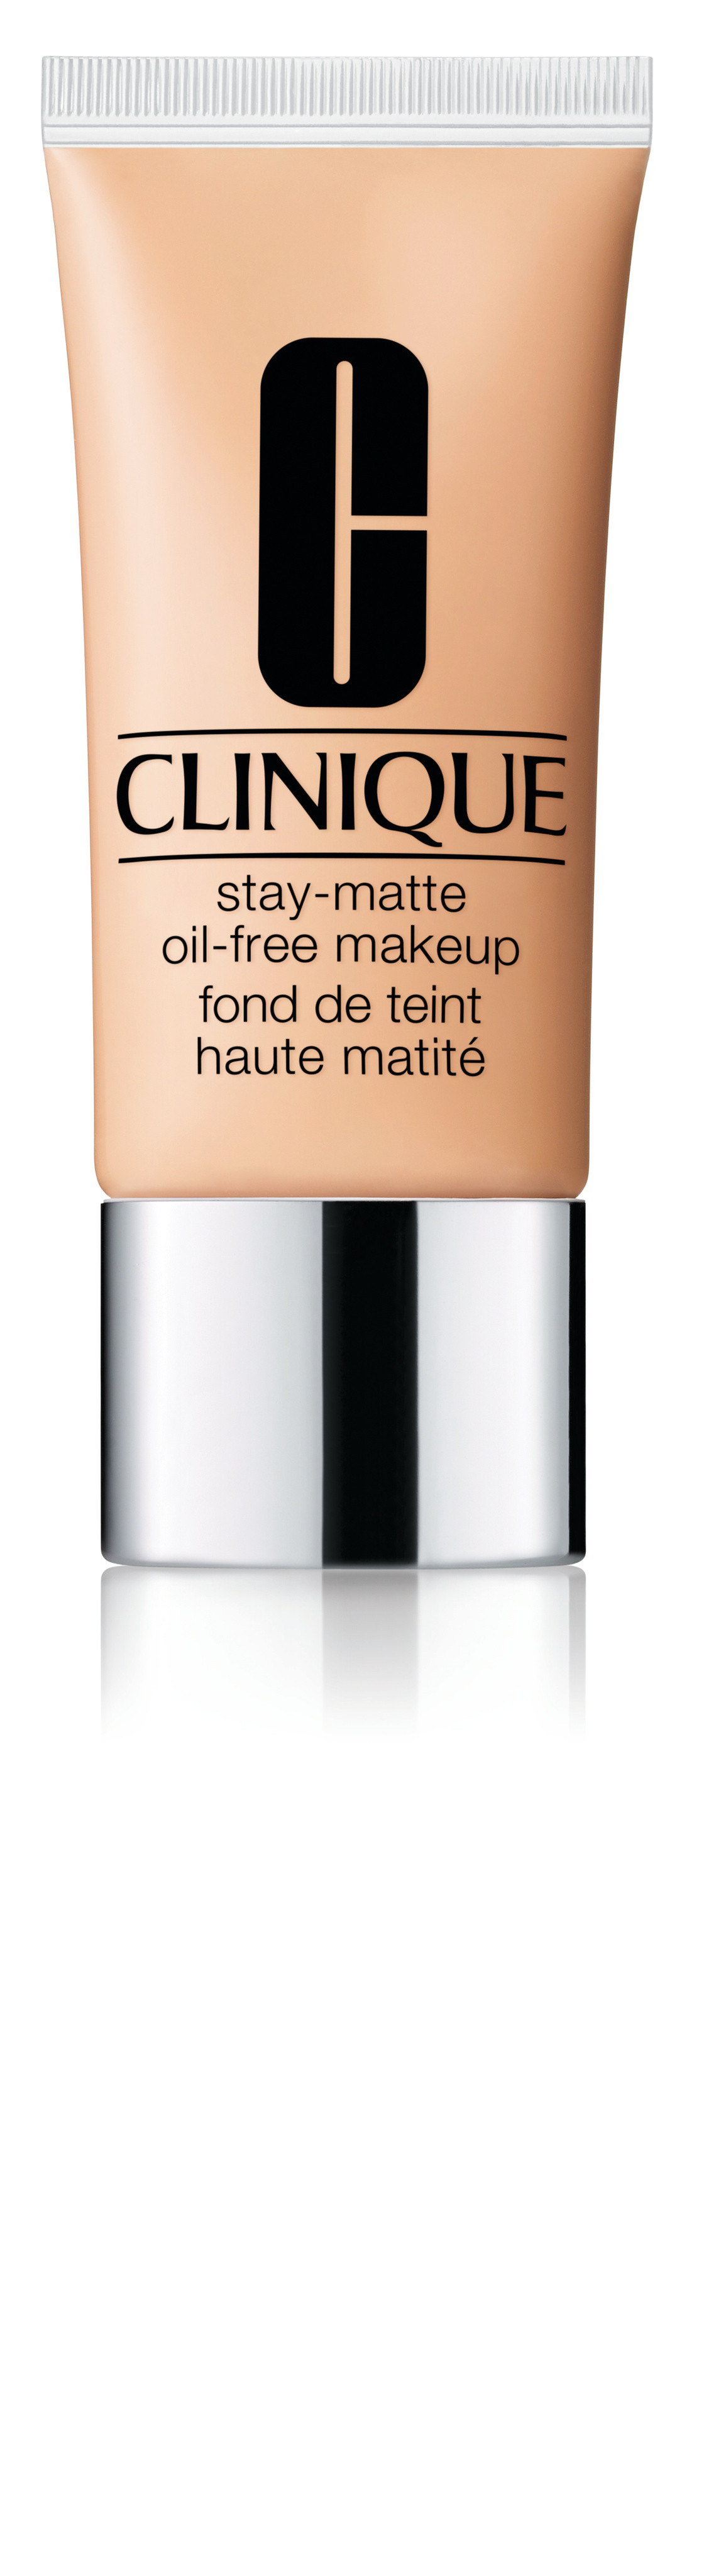 Clinique stay-matte oil-free make-up - cn 52 neutral  30 ml, CN 52 NEUTRAL, large image number 0